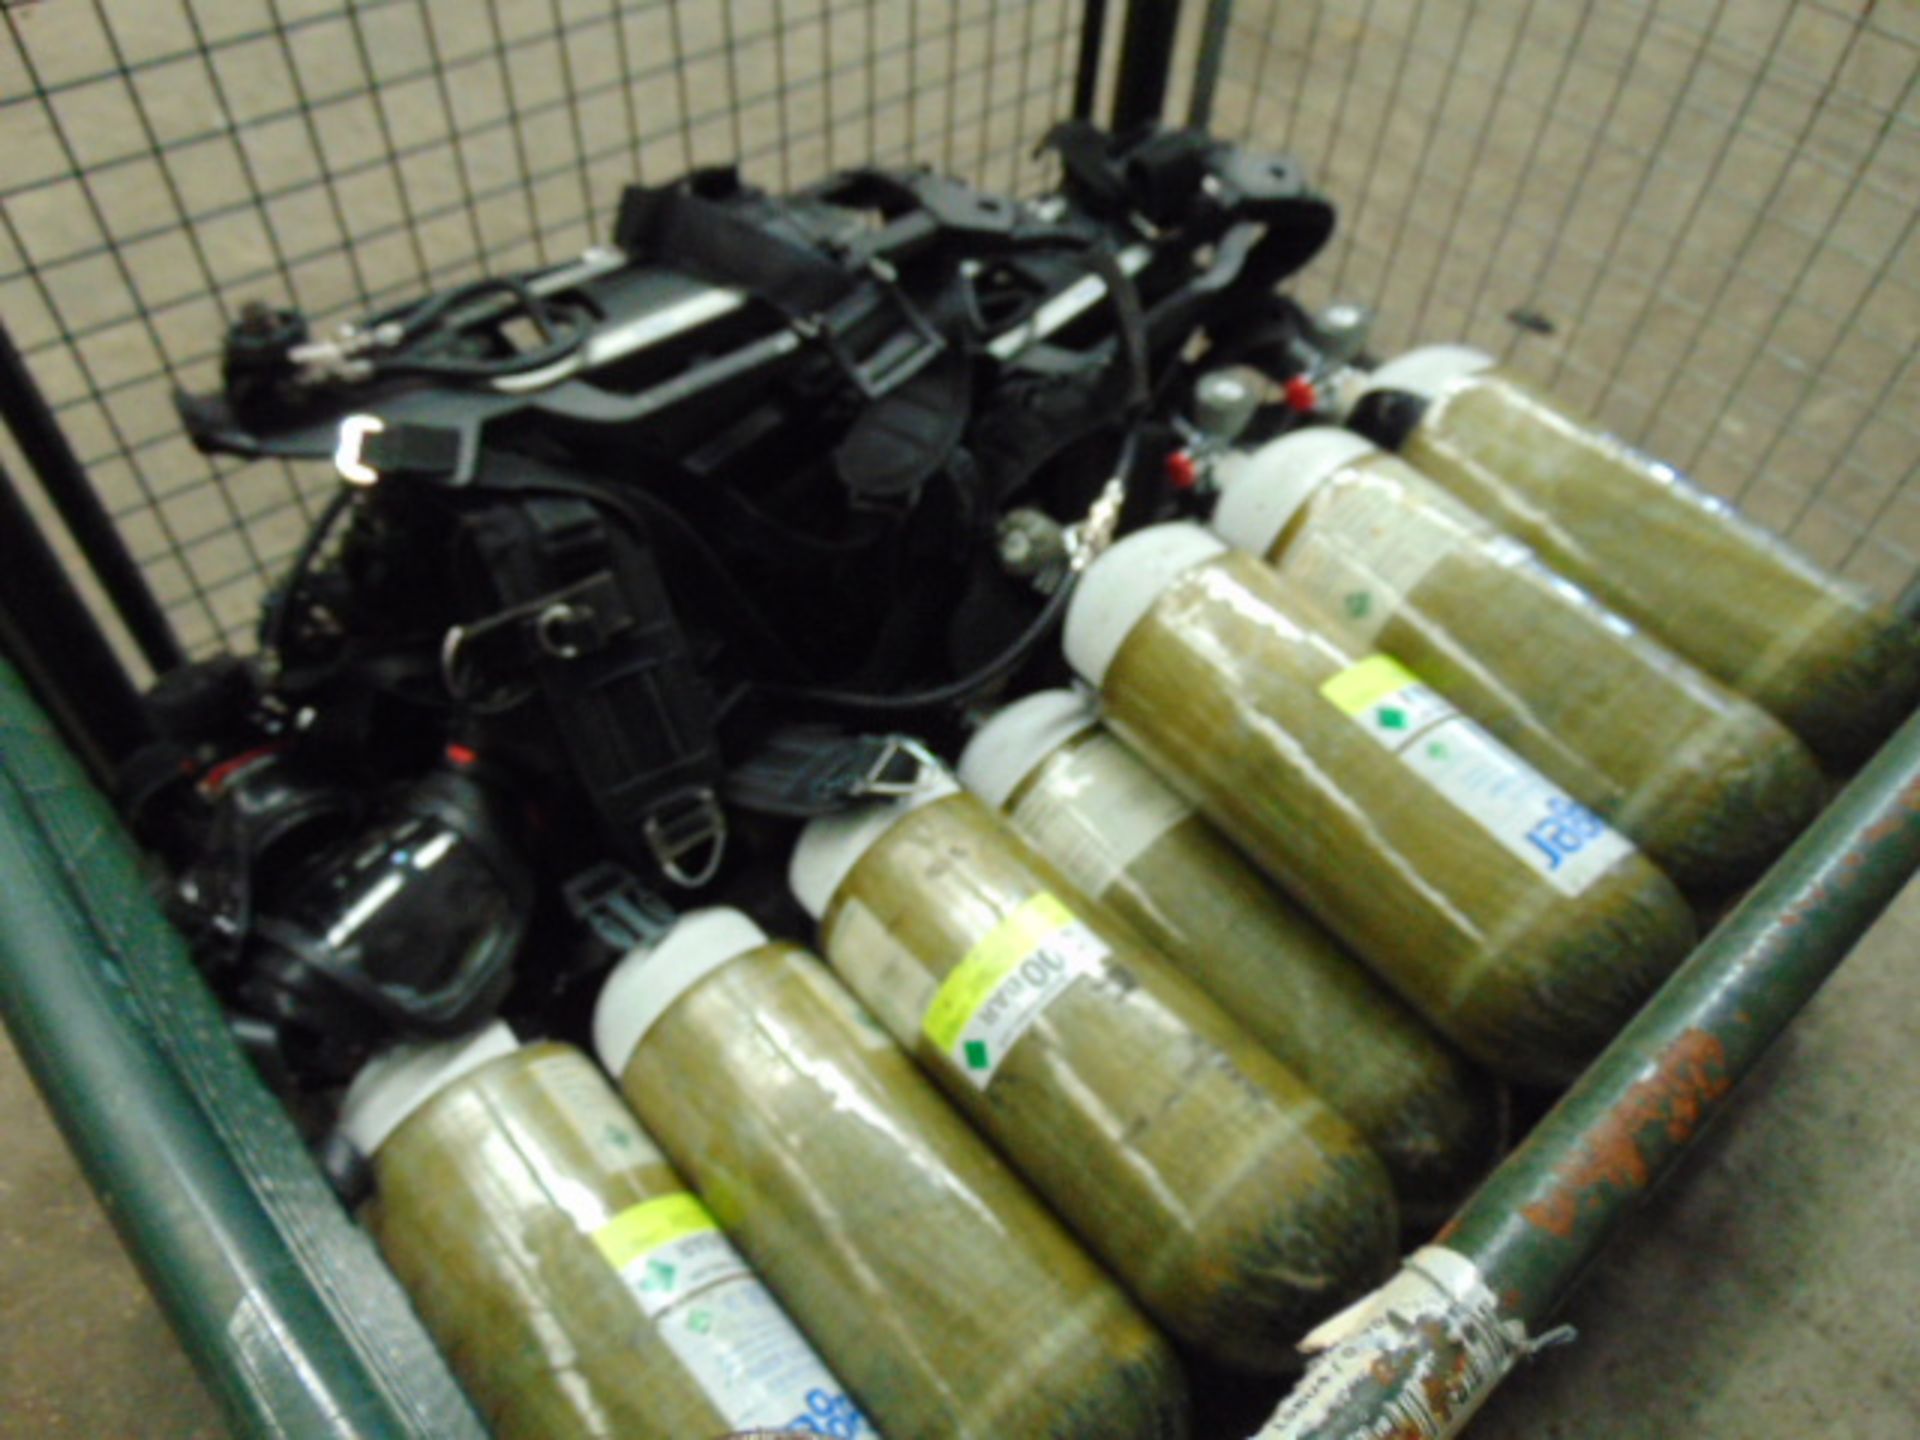 5 x Drager PSS 7000 Self Contained Breathing Apparatus w/ 10 x Drager 300 Bar Air Cylinders - Image 23 of 28